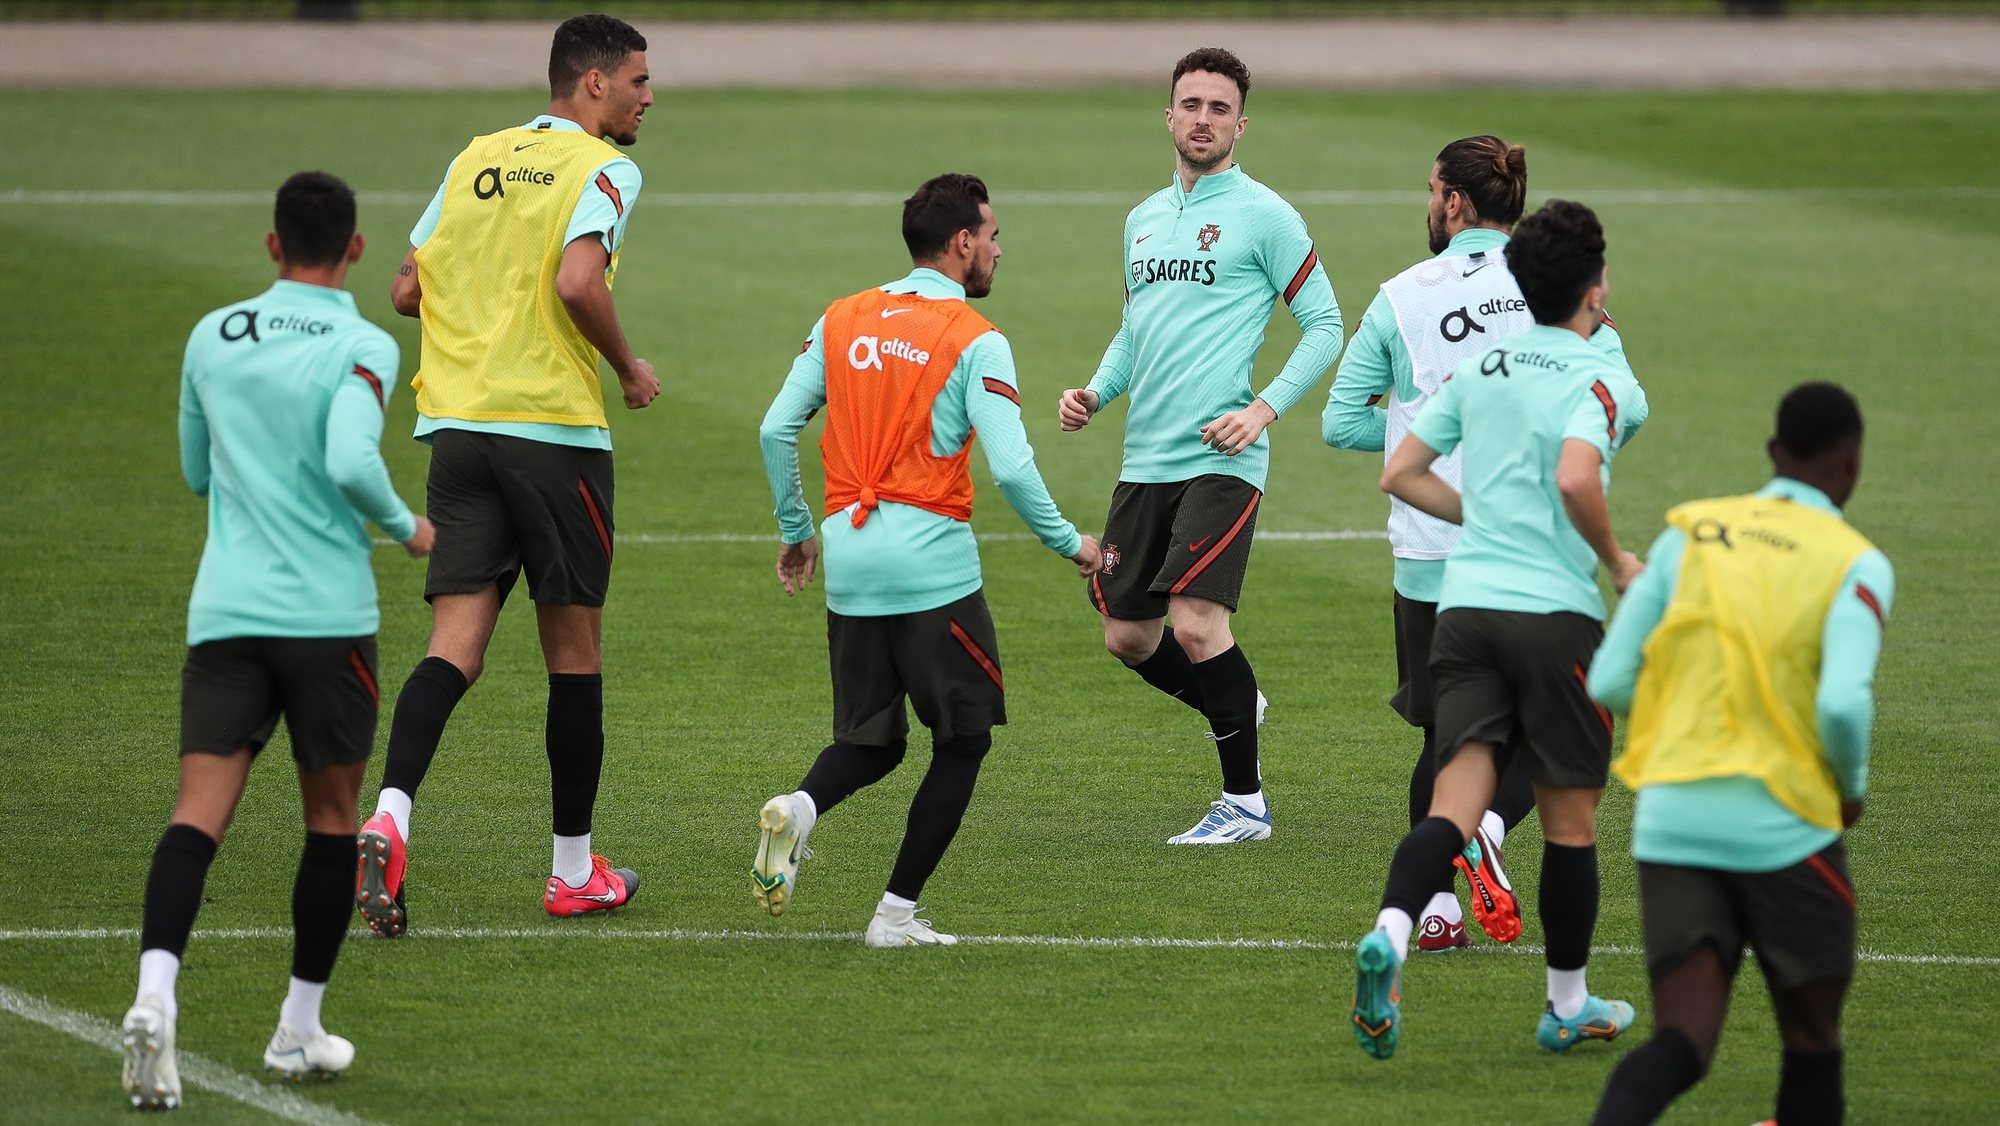 Portugal&#039;s Diogo Jota (C) and his teammates attend a training session at Cidade do Futebol in Oeiras, Portugal, 3 June 2022. Portugal will play against Switzerland for the upcoming UEFA Nations League match on 5 May 2022. MARIO CRUZ/LUSA